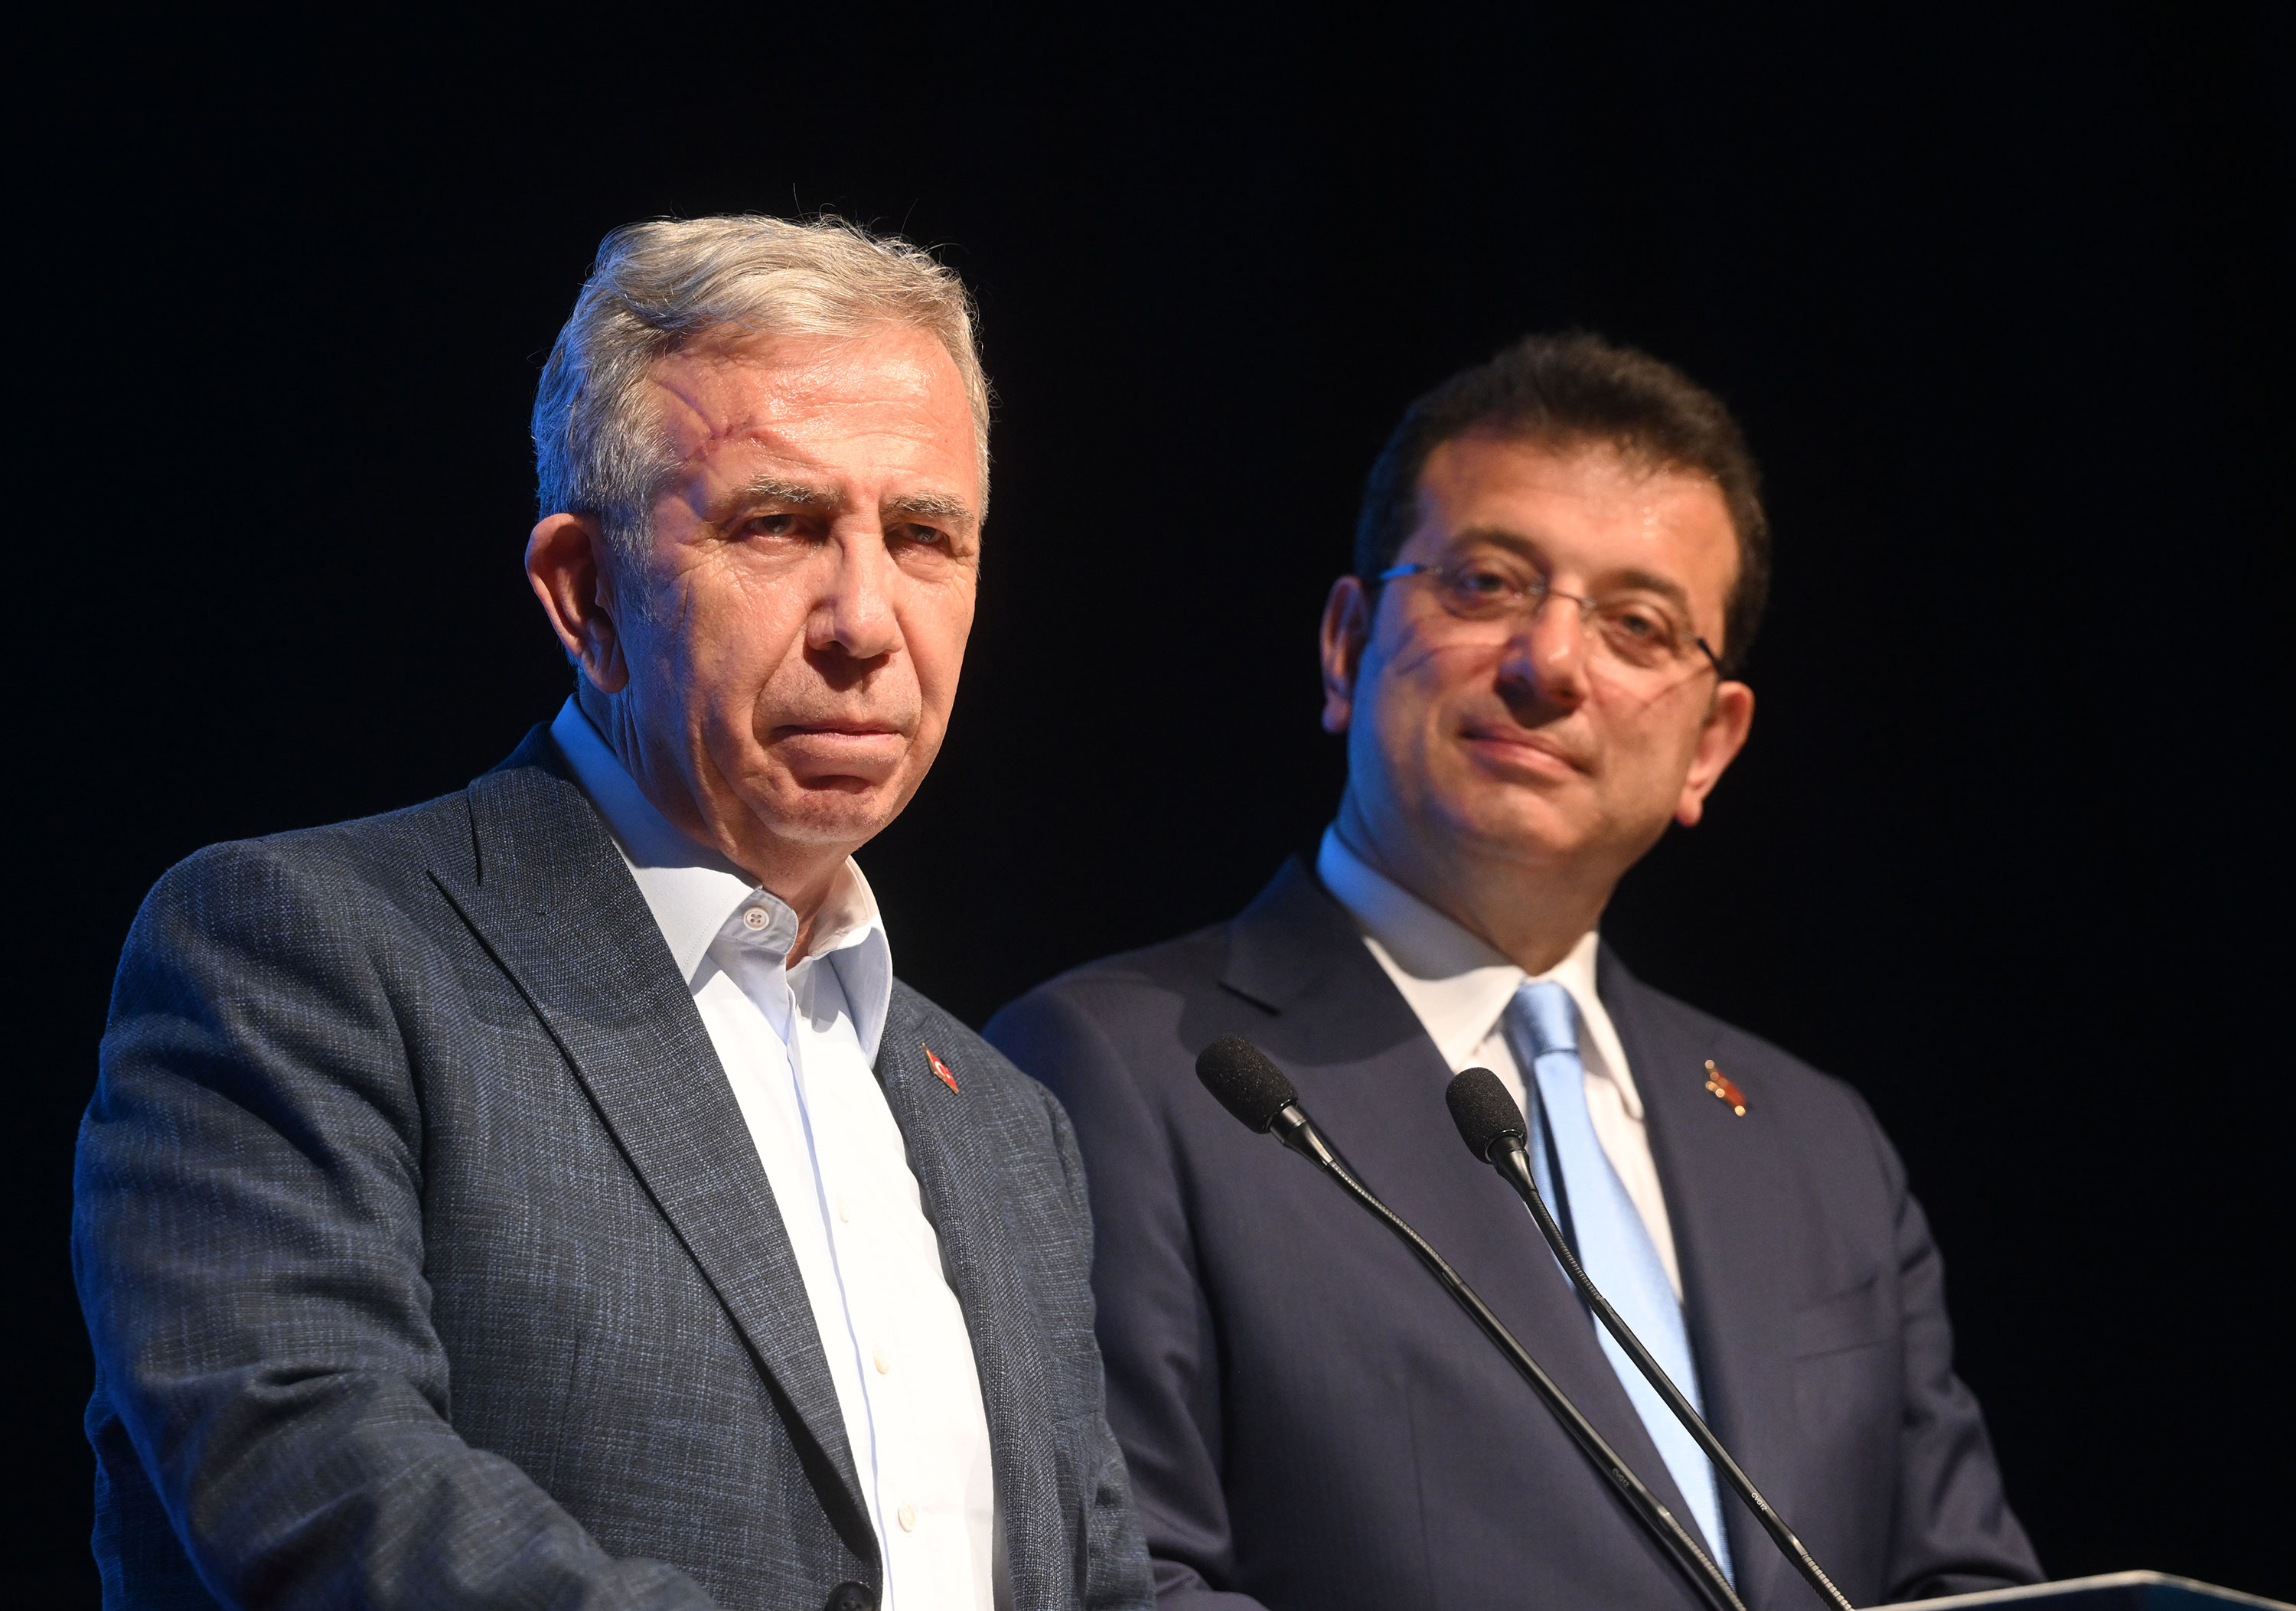 From left, Mansur Yavas, Mayor of Ankara, and Ekrem Imamoglu, Mayor of Istanbul, hold a press conference at the Republican People's Party (CHP) headquarters in Ankara, Turkey, on May 14. 